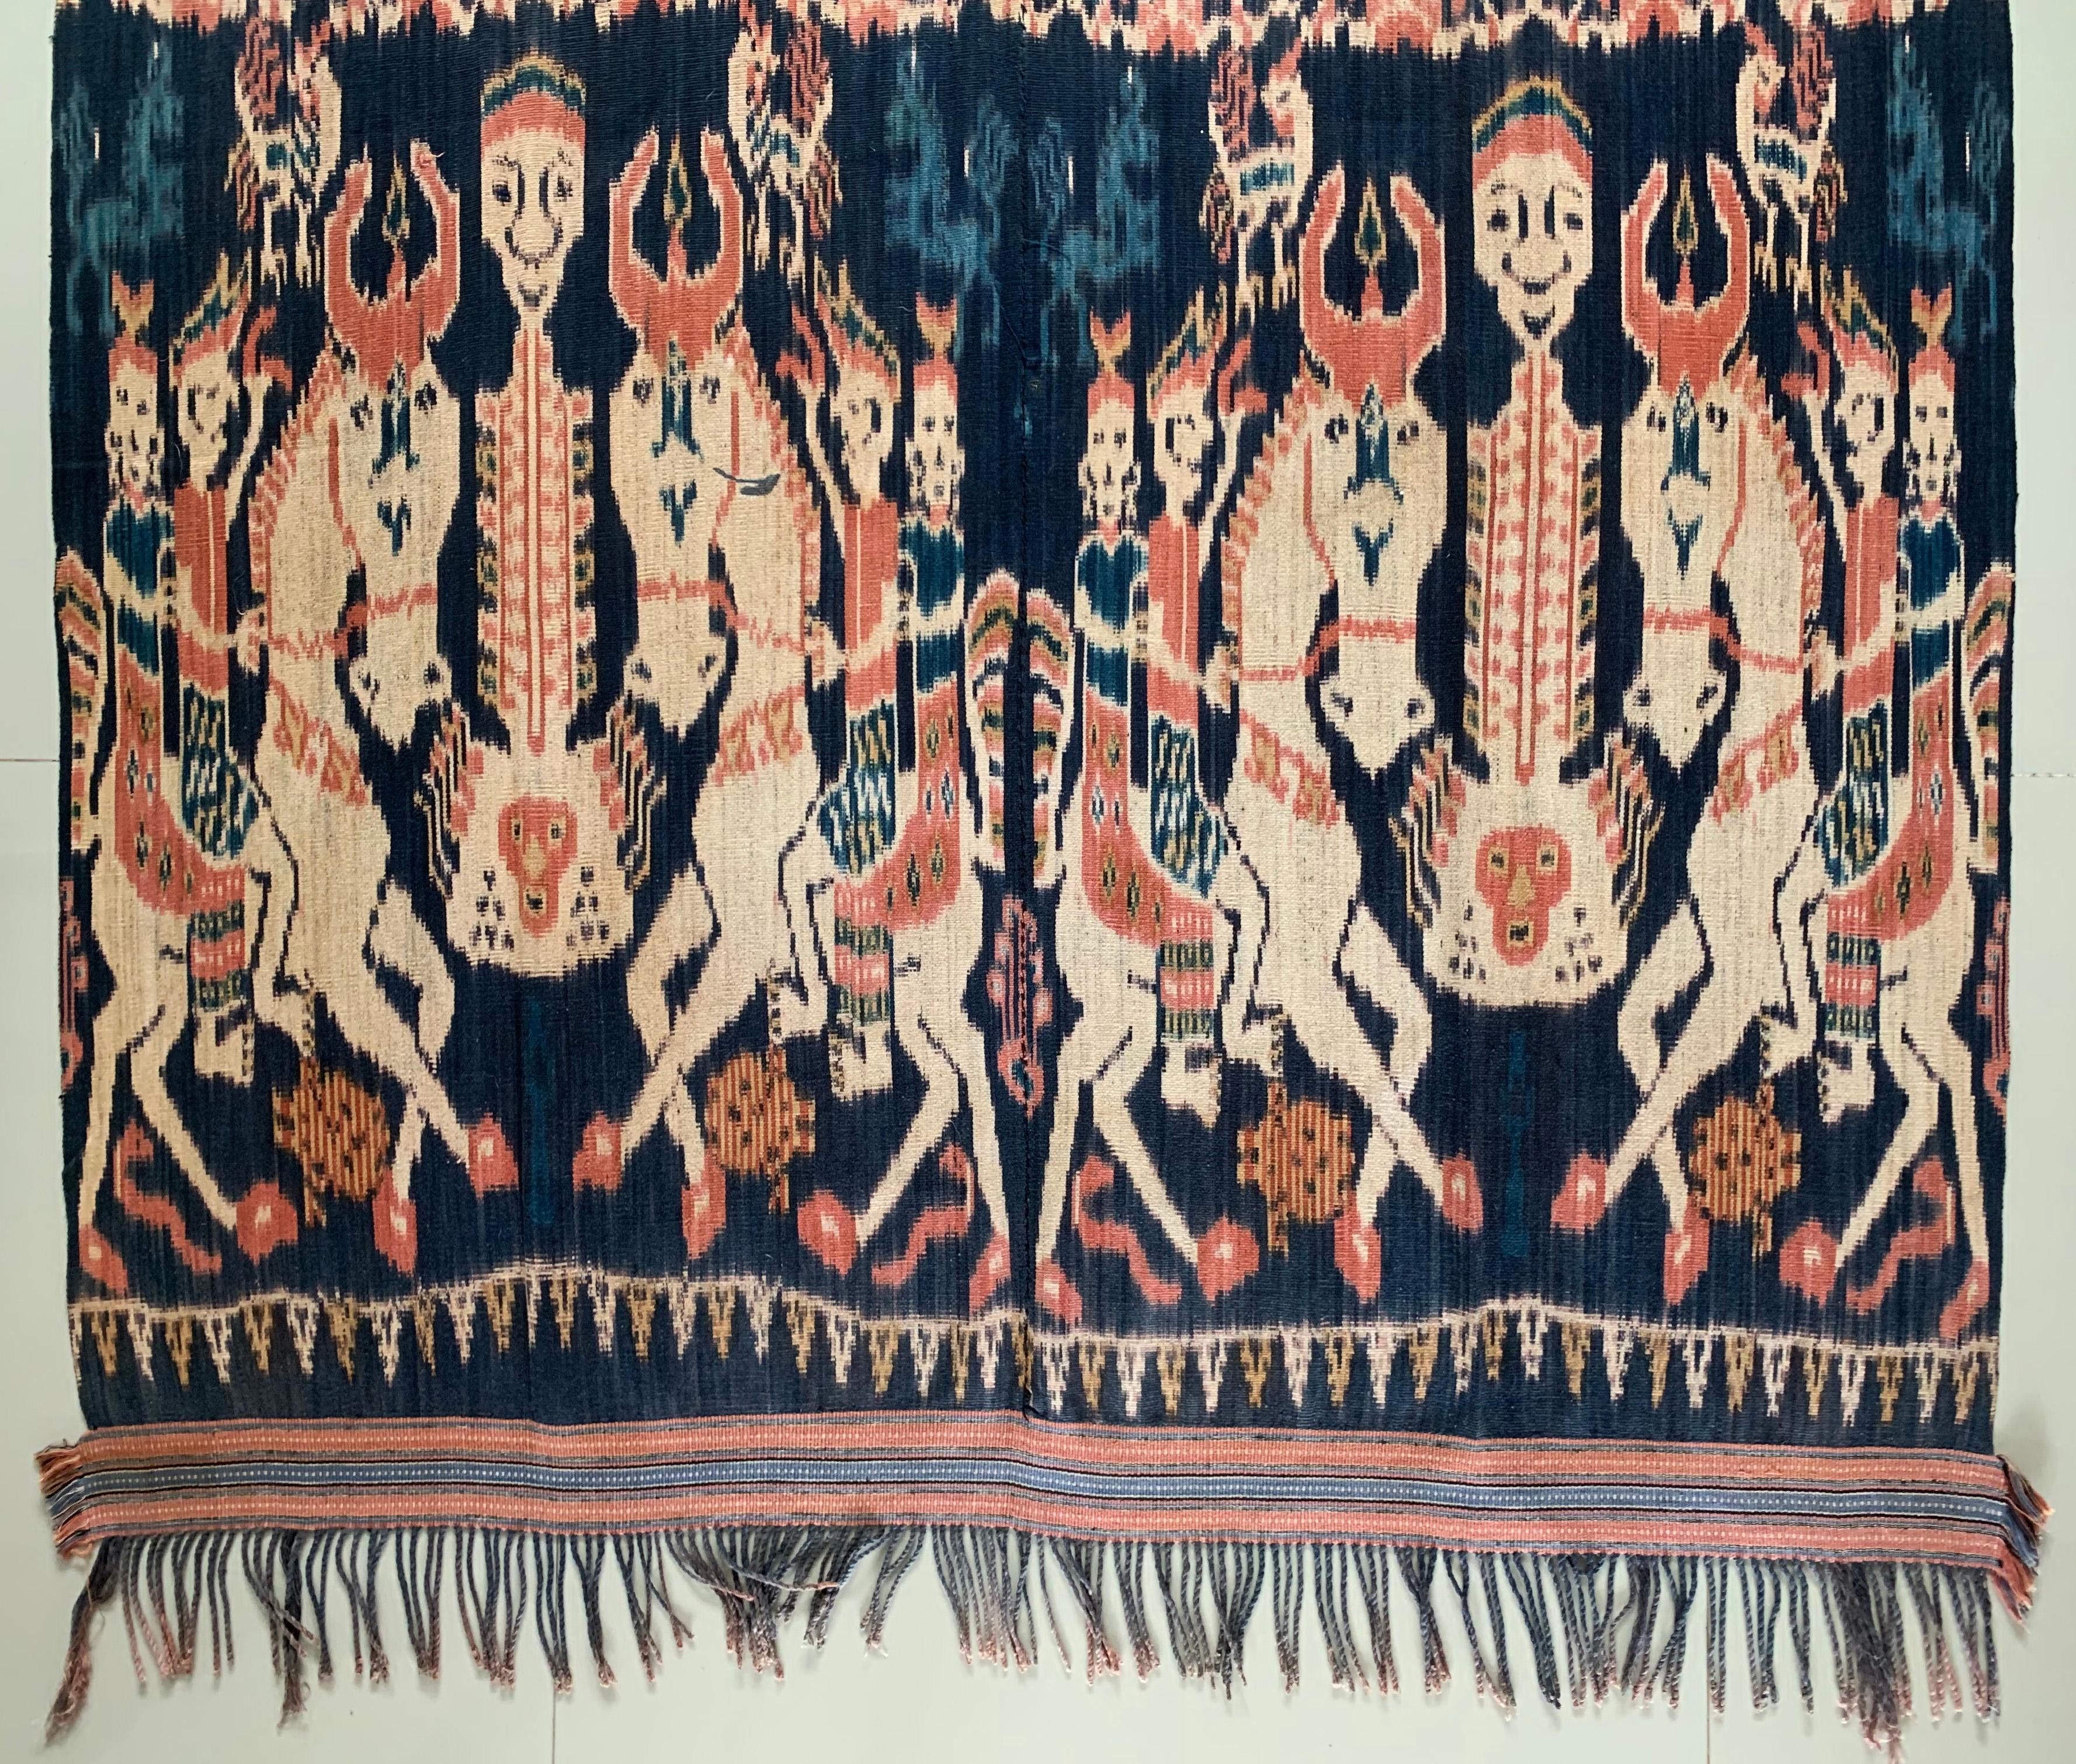 This Ikat textile originates from the Island of Sumba, Indonesia. It is hand-woven using naturally dyed yarns via a method passed on through generations. It features a stunning array of distinct tribal patterns and chicken, horse and human motifs. A